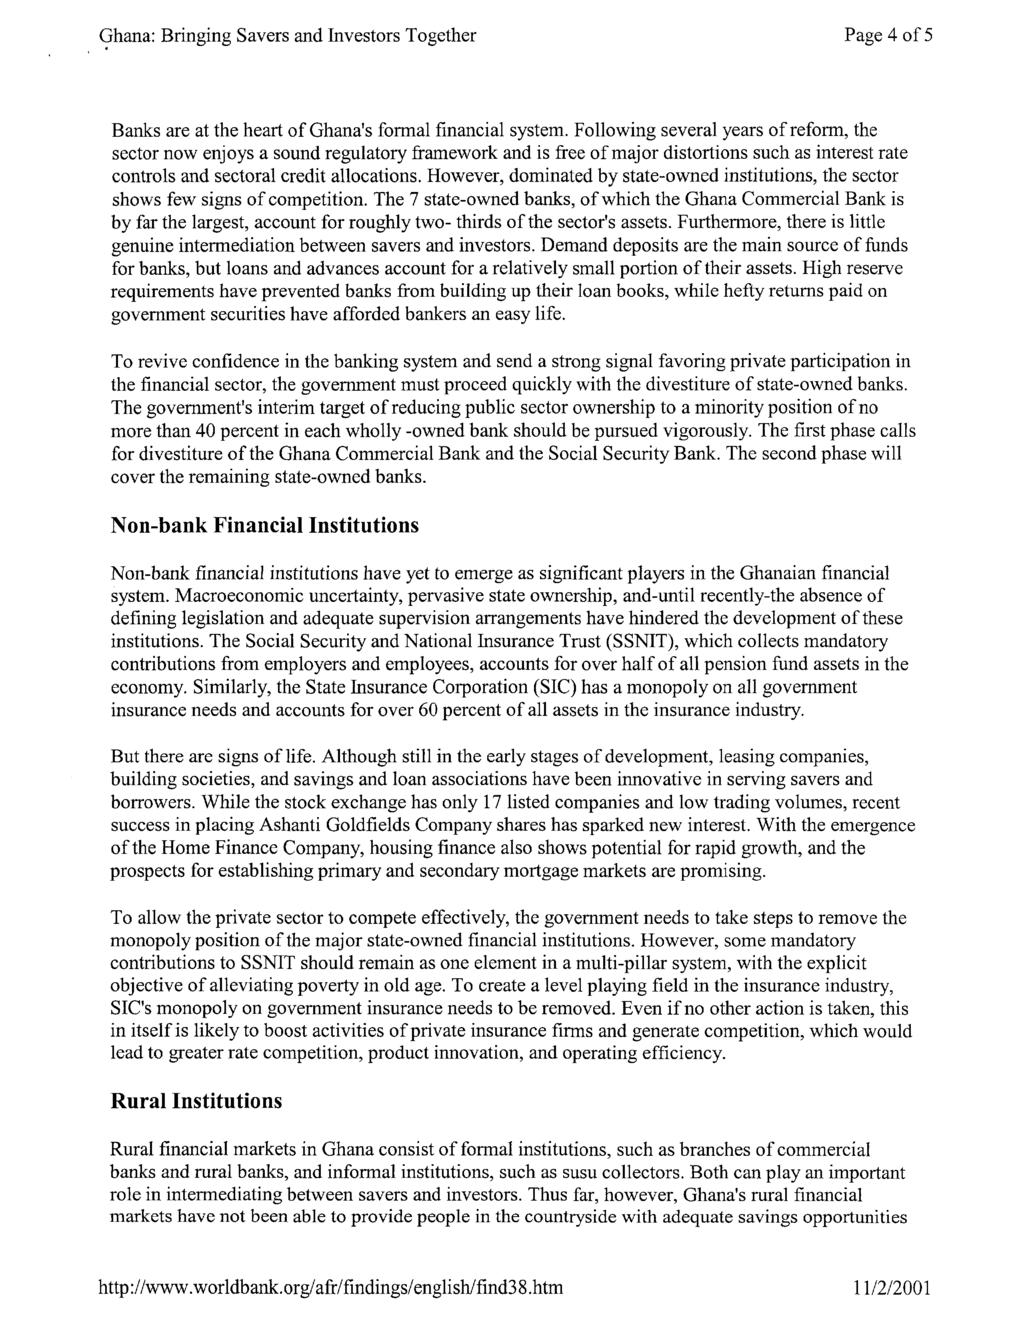 Ghana: Bringing Savers and Investors Together Page 4 of 5 Banks are at the heart of Ghana's formal financial system.